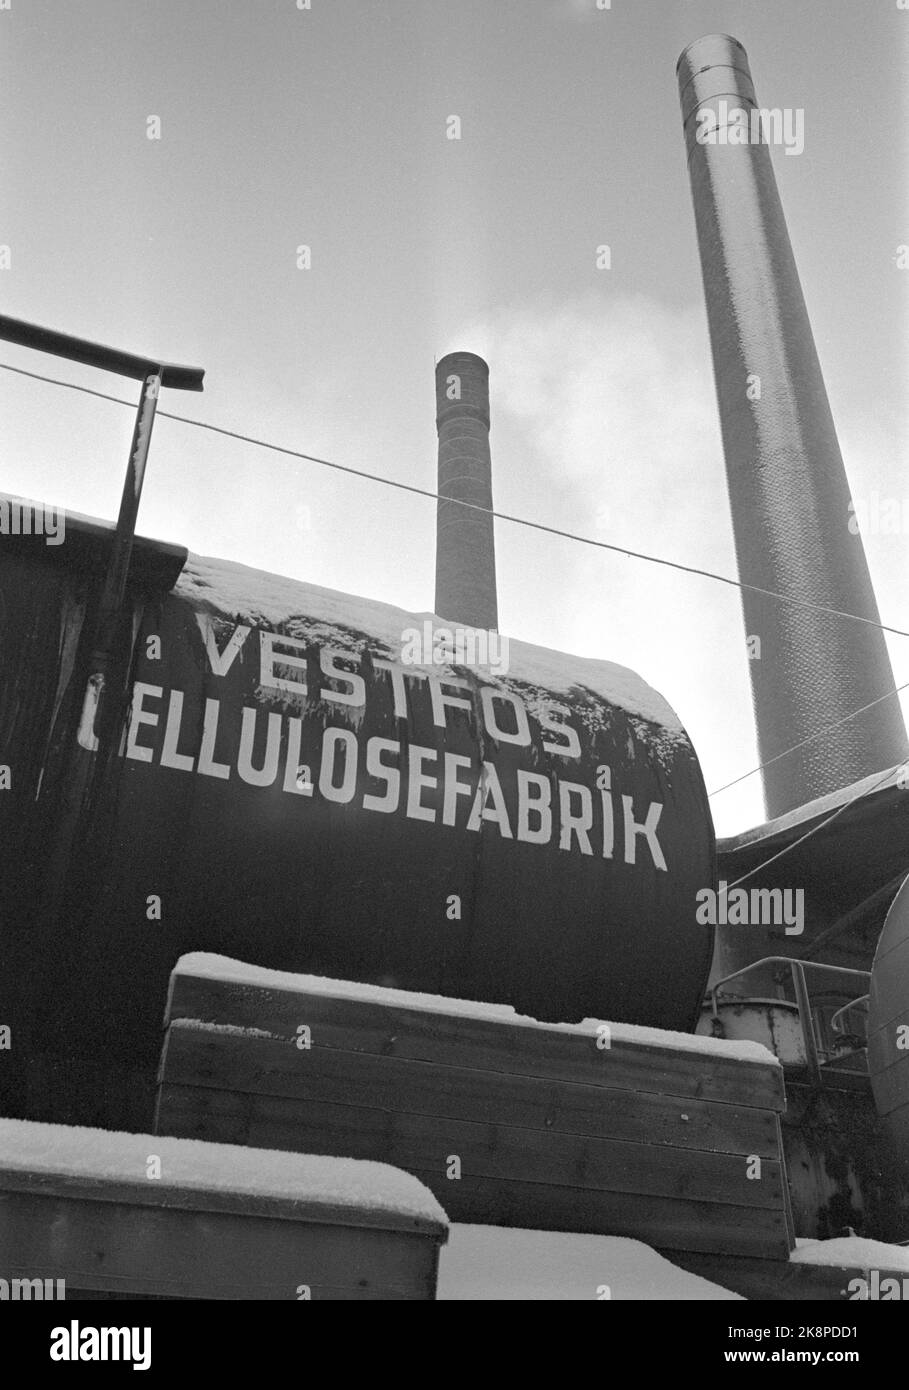 Vestfossen 19701212 The wheels are on Vestfossen. The layoffs at Vestfos Cellulose Factory came as a shock to the employees, as did the bankruptcy. Poor treatment of the employees. Environmental images from the last working days before the company closed its doors. Photo; Sverre A. Børretzen / Current / NTB Stock Photo